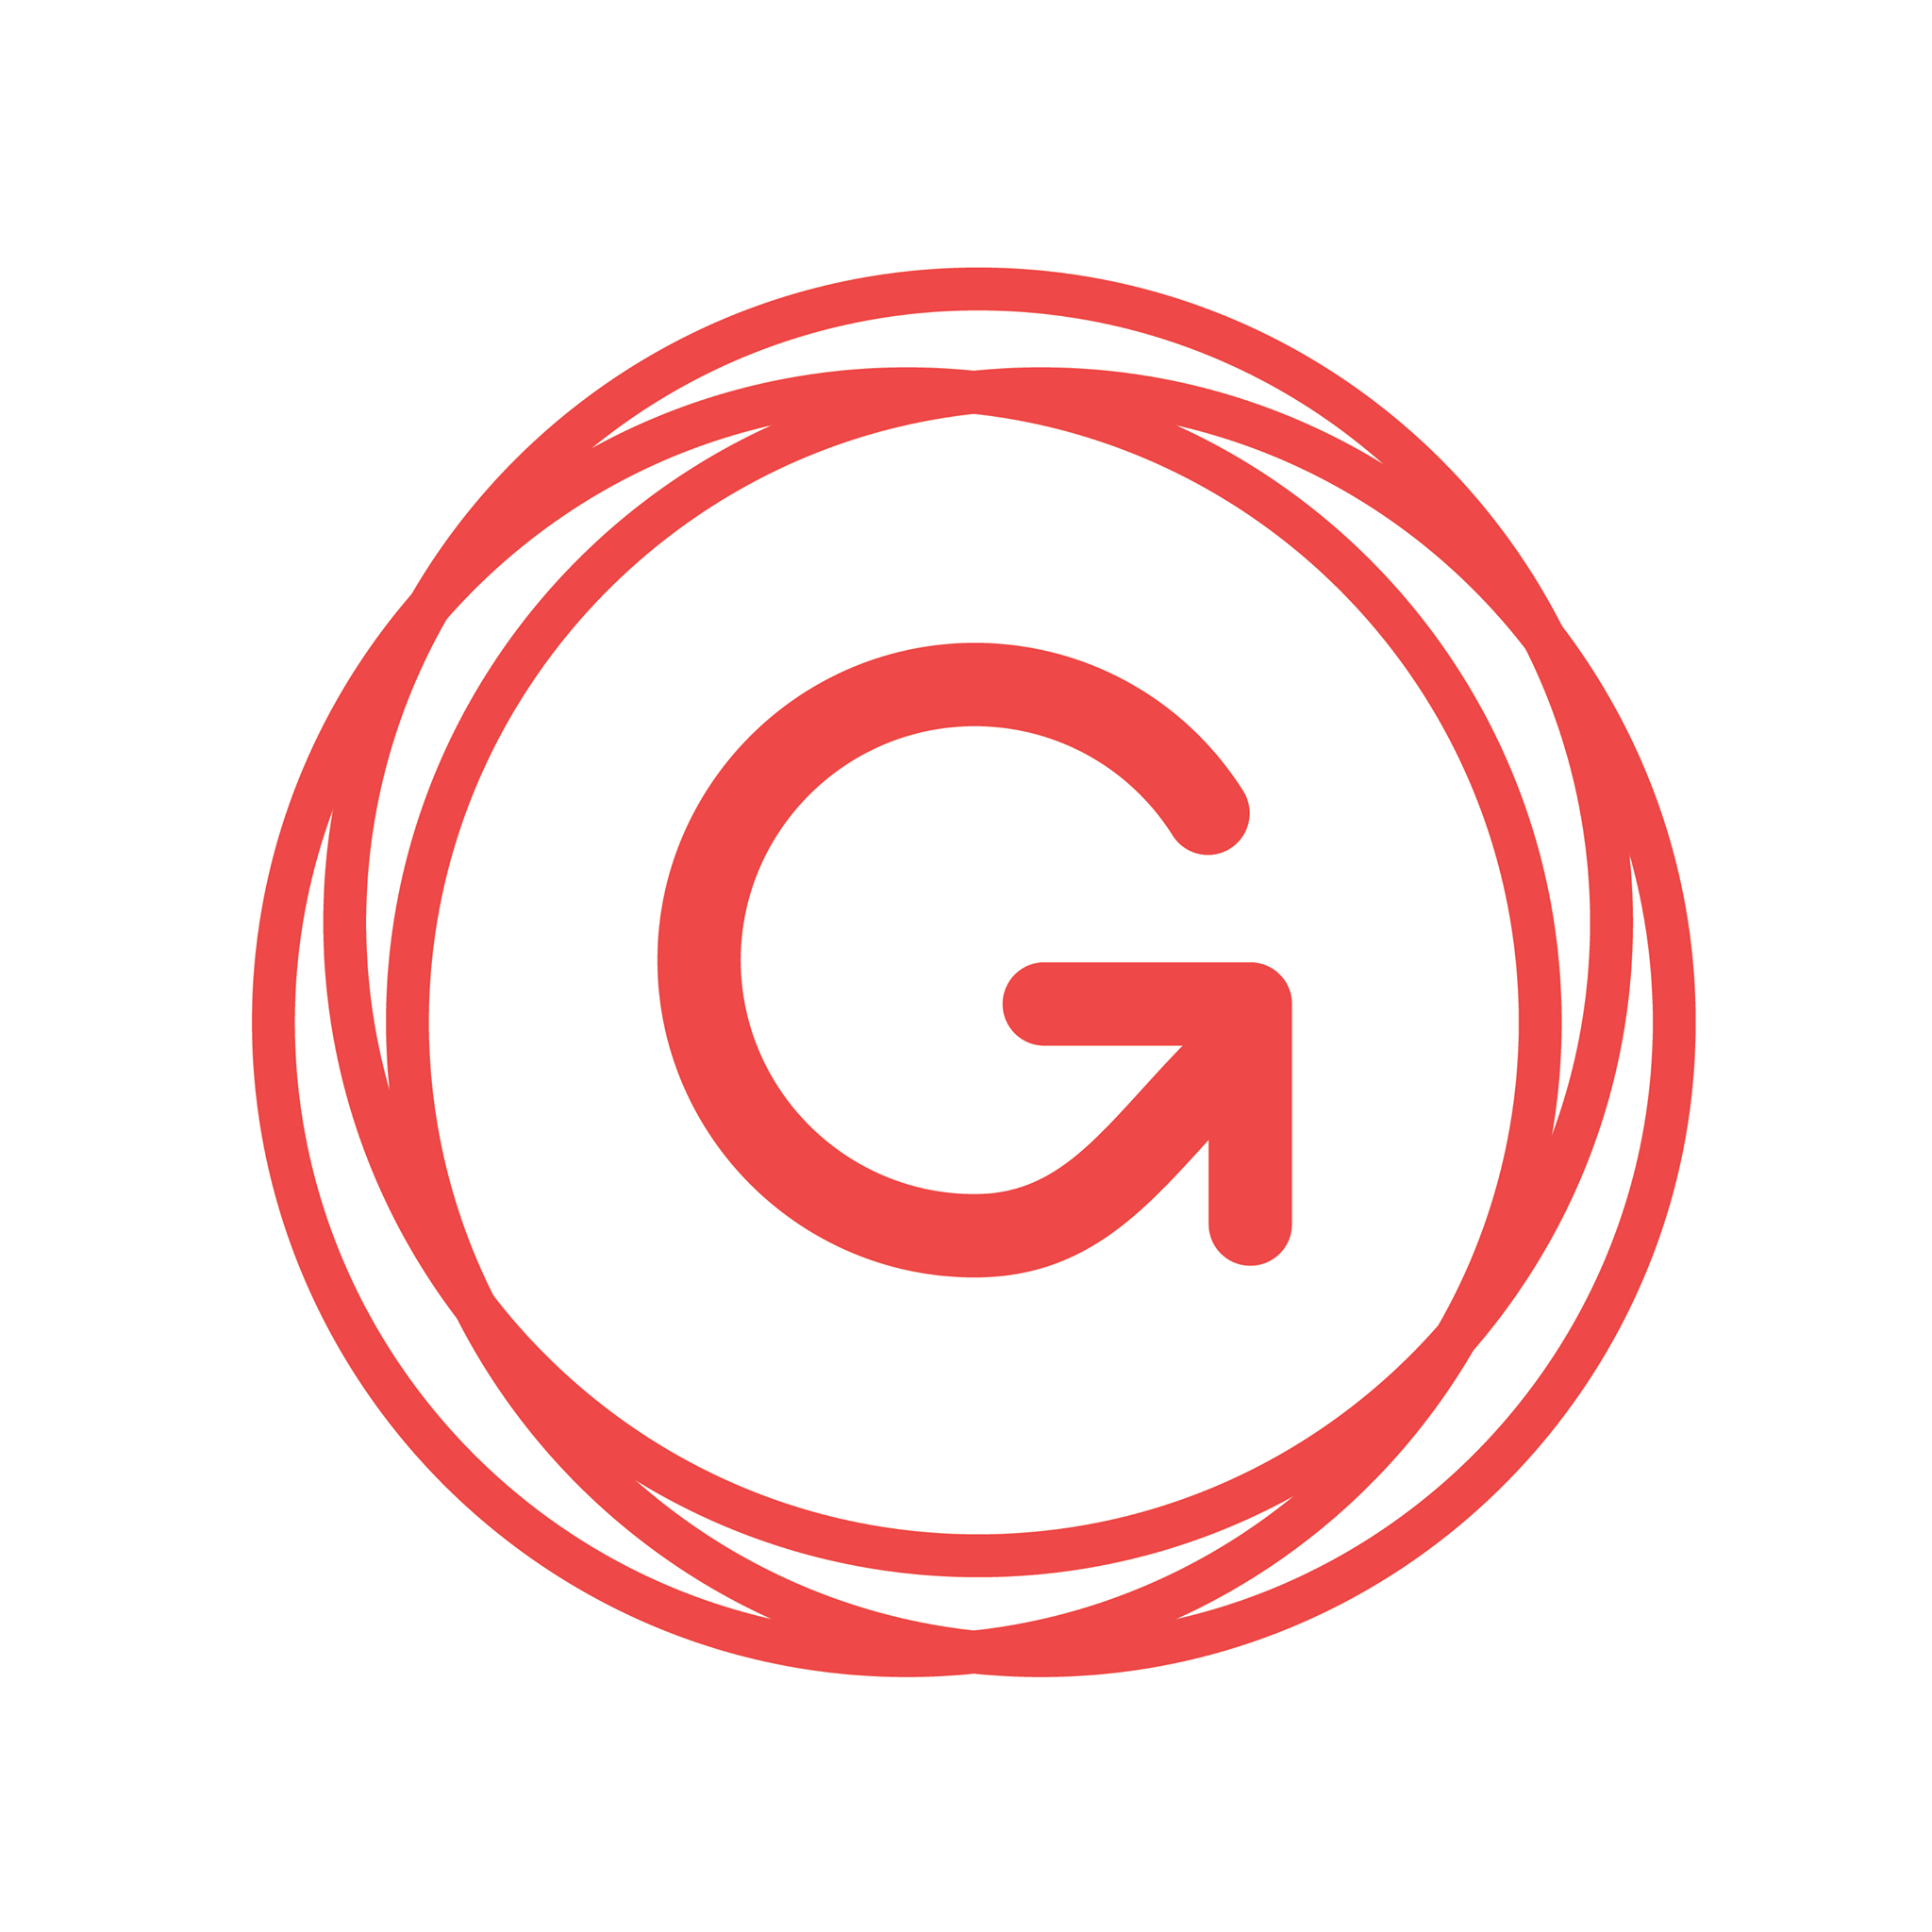 Gusto Logo - Gusto logo - Coverager - Insurance news and insights